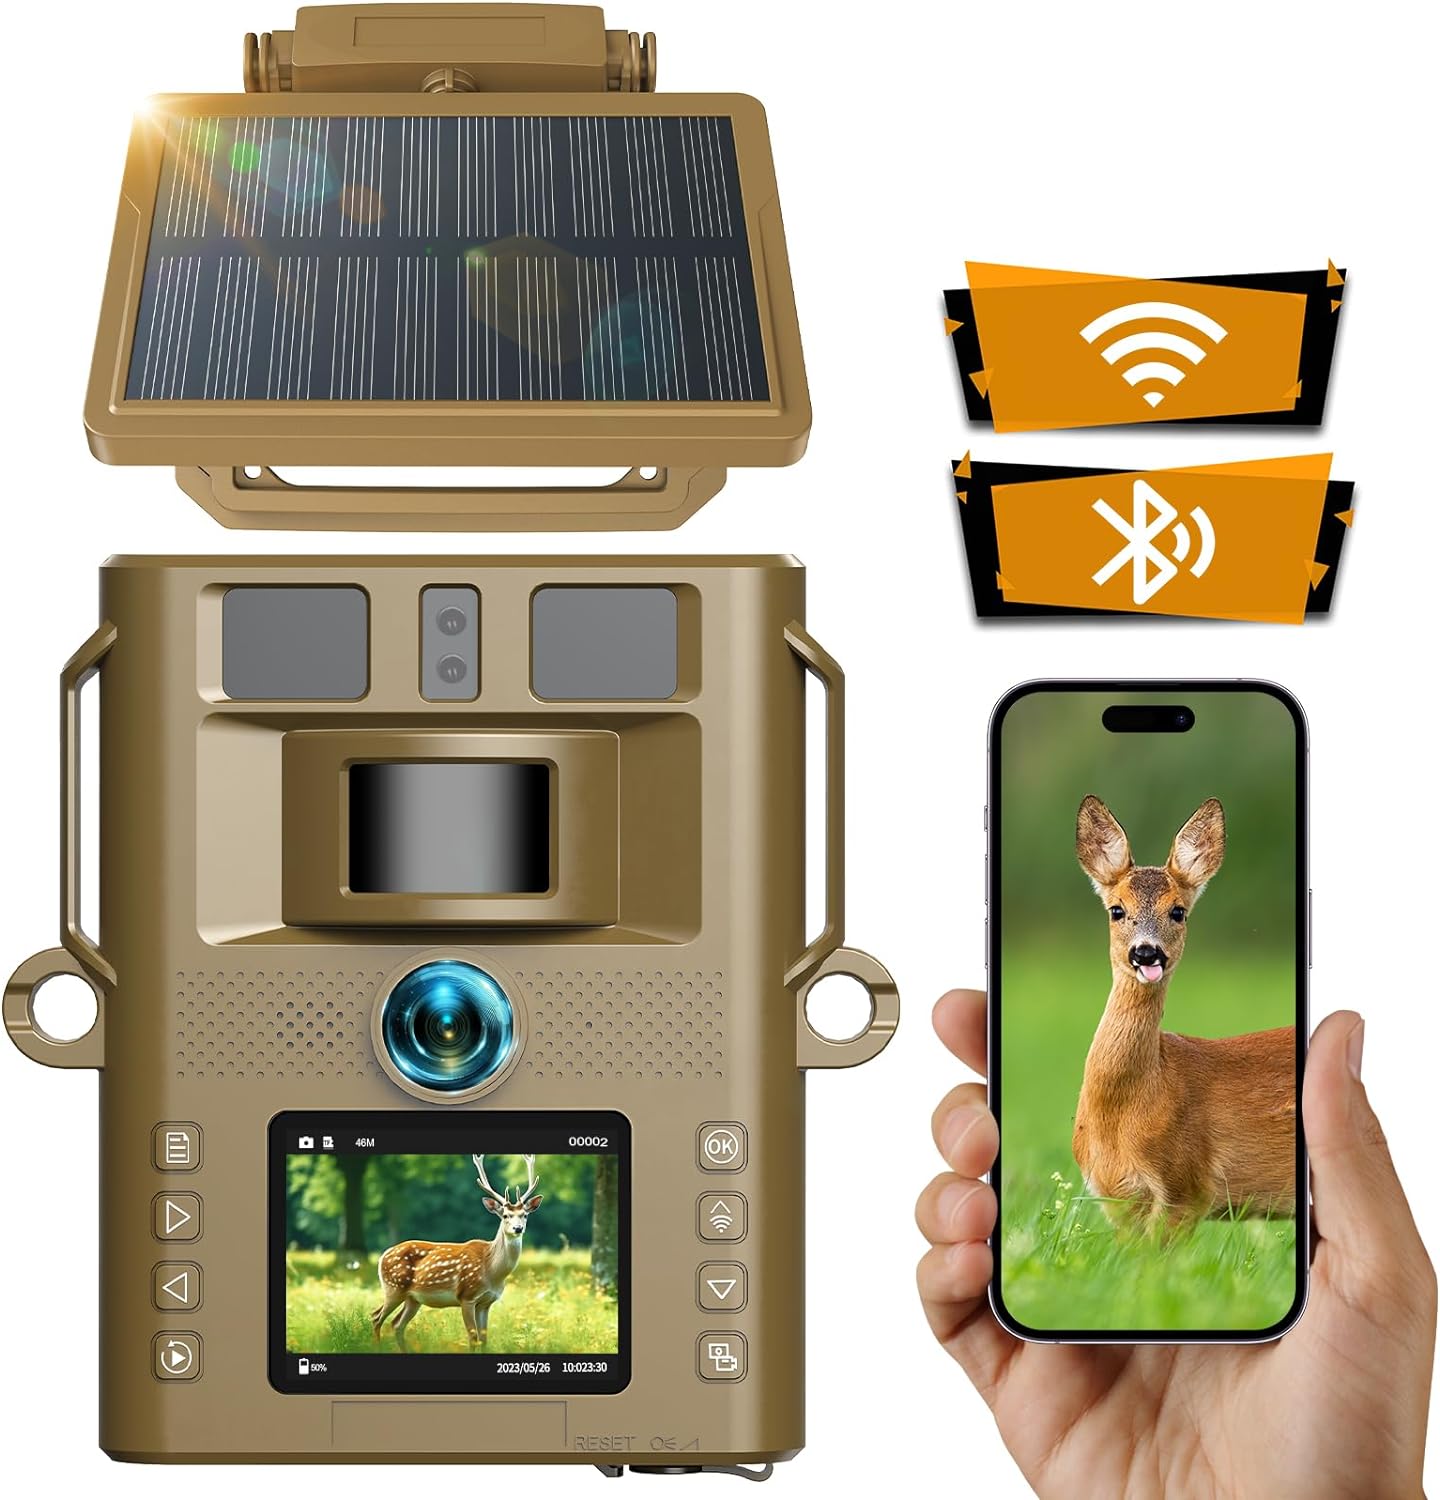 CAMPARK Solar WiFi Trail Camera Native 4K 30fps 46MP Super Concealment Deer Hunting Game Camera wtih 5000mAh 950nm Night Vision 120° Wide Angel Motion Activated Waterproof IP66 Trail Wildlife Camera